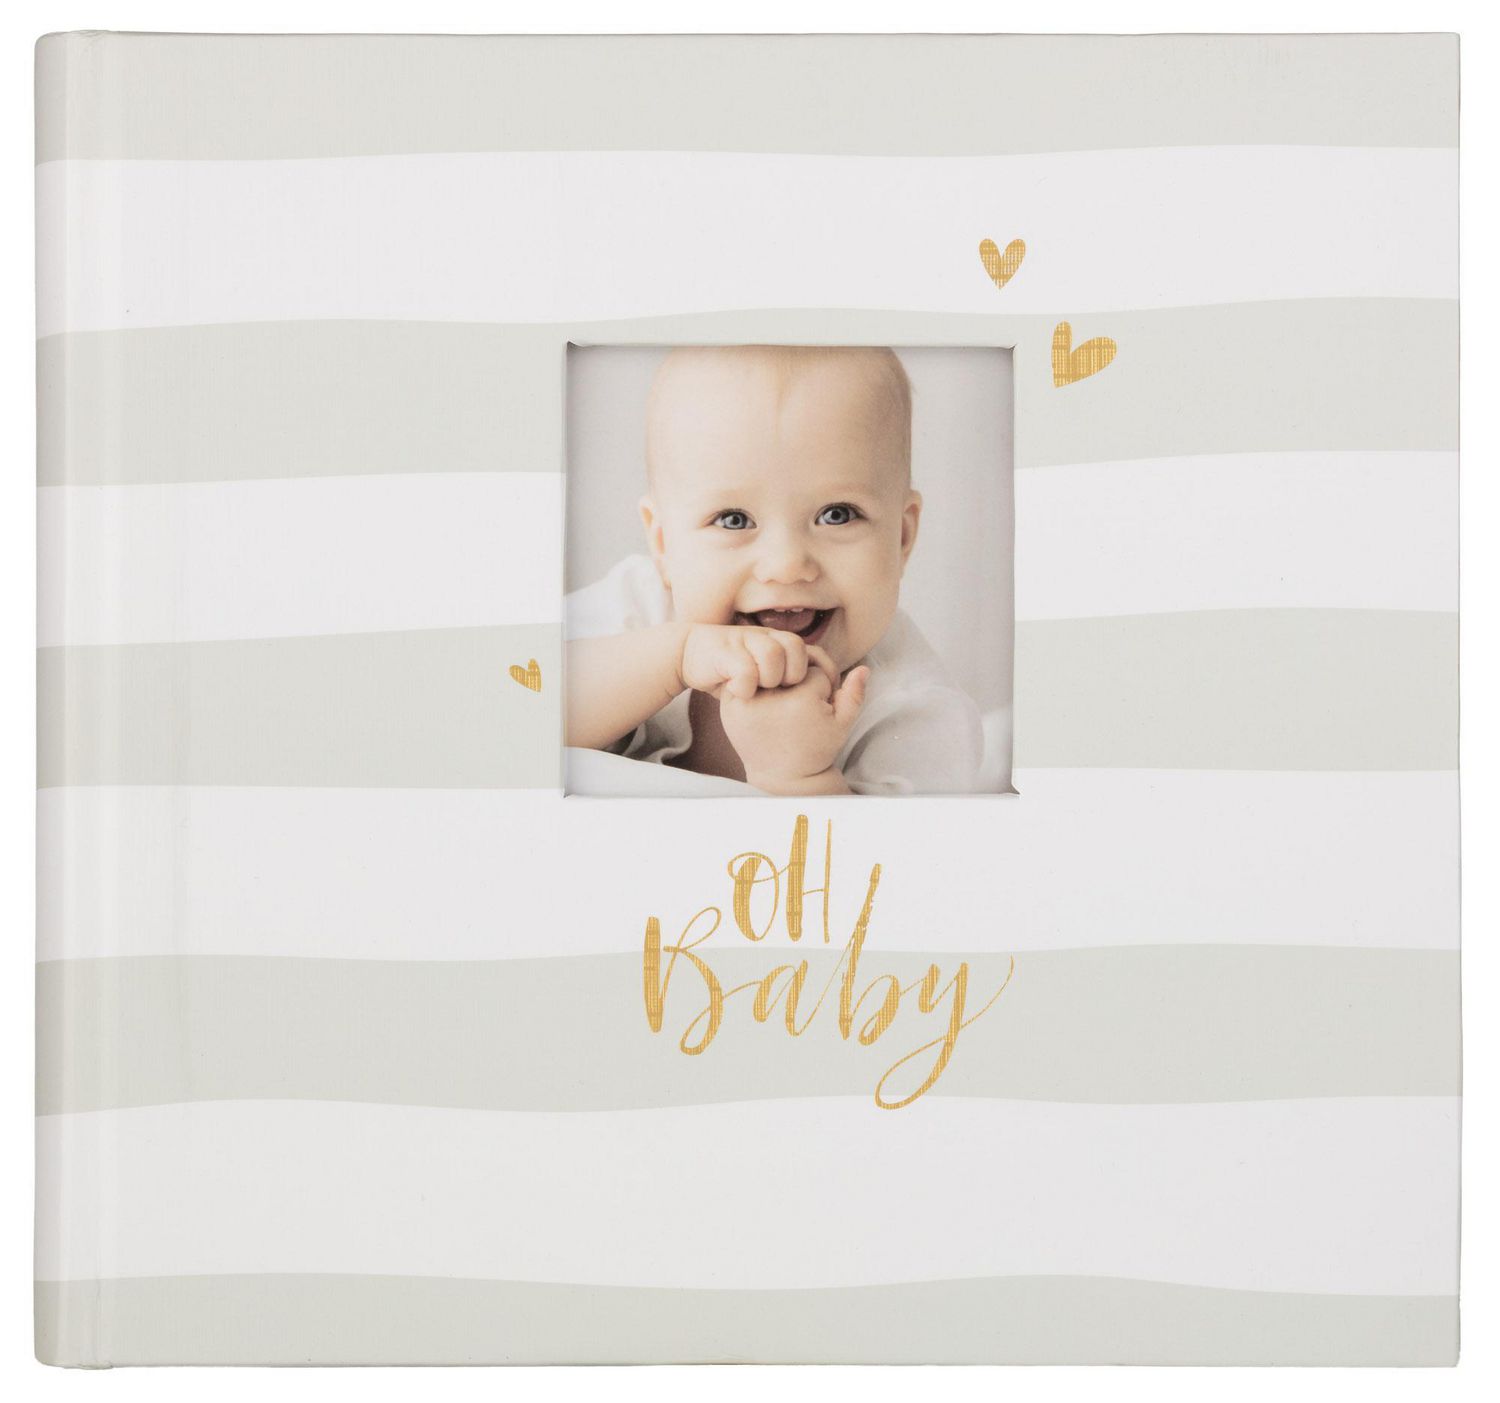 Pinnacle Frames And Accents Grey White Striped Oh Baby Photo Album